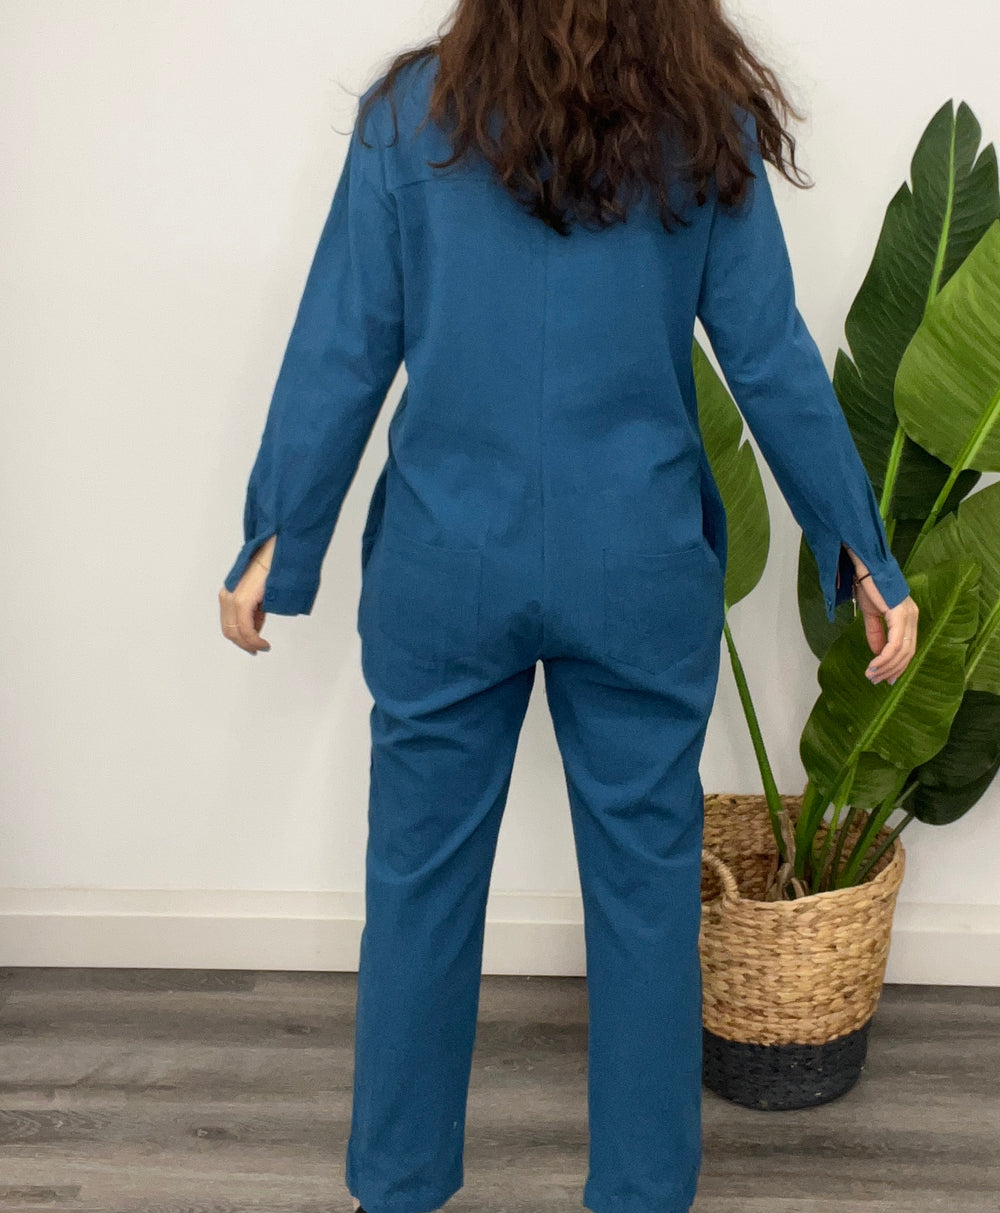 THE MAYFLOWER STEEL BLUE COVERALL